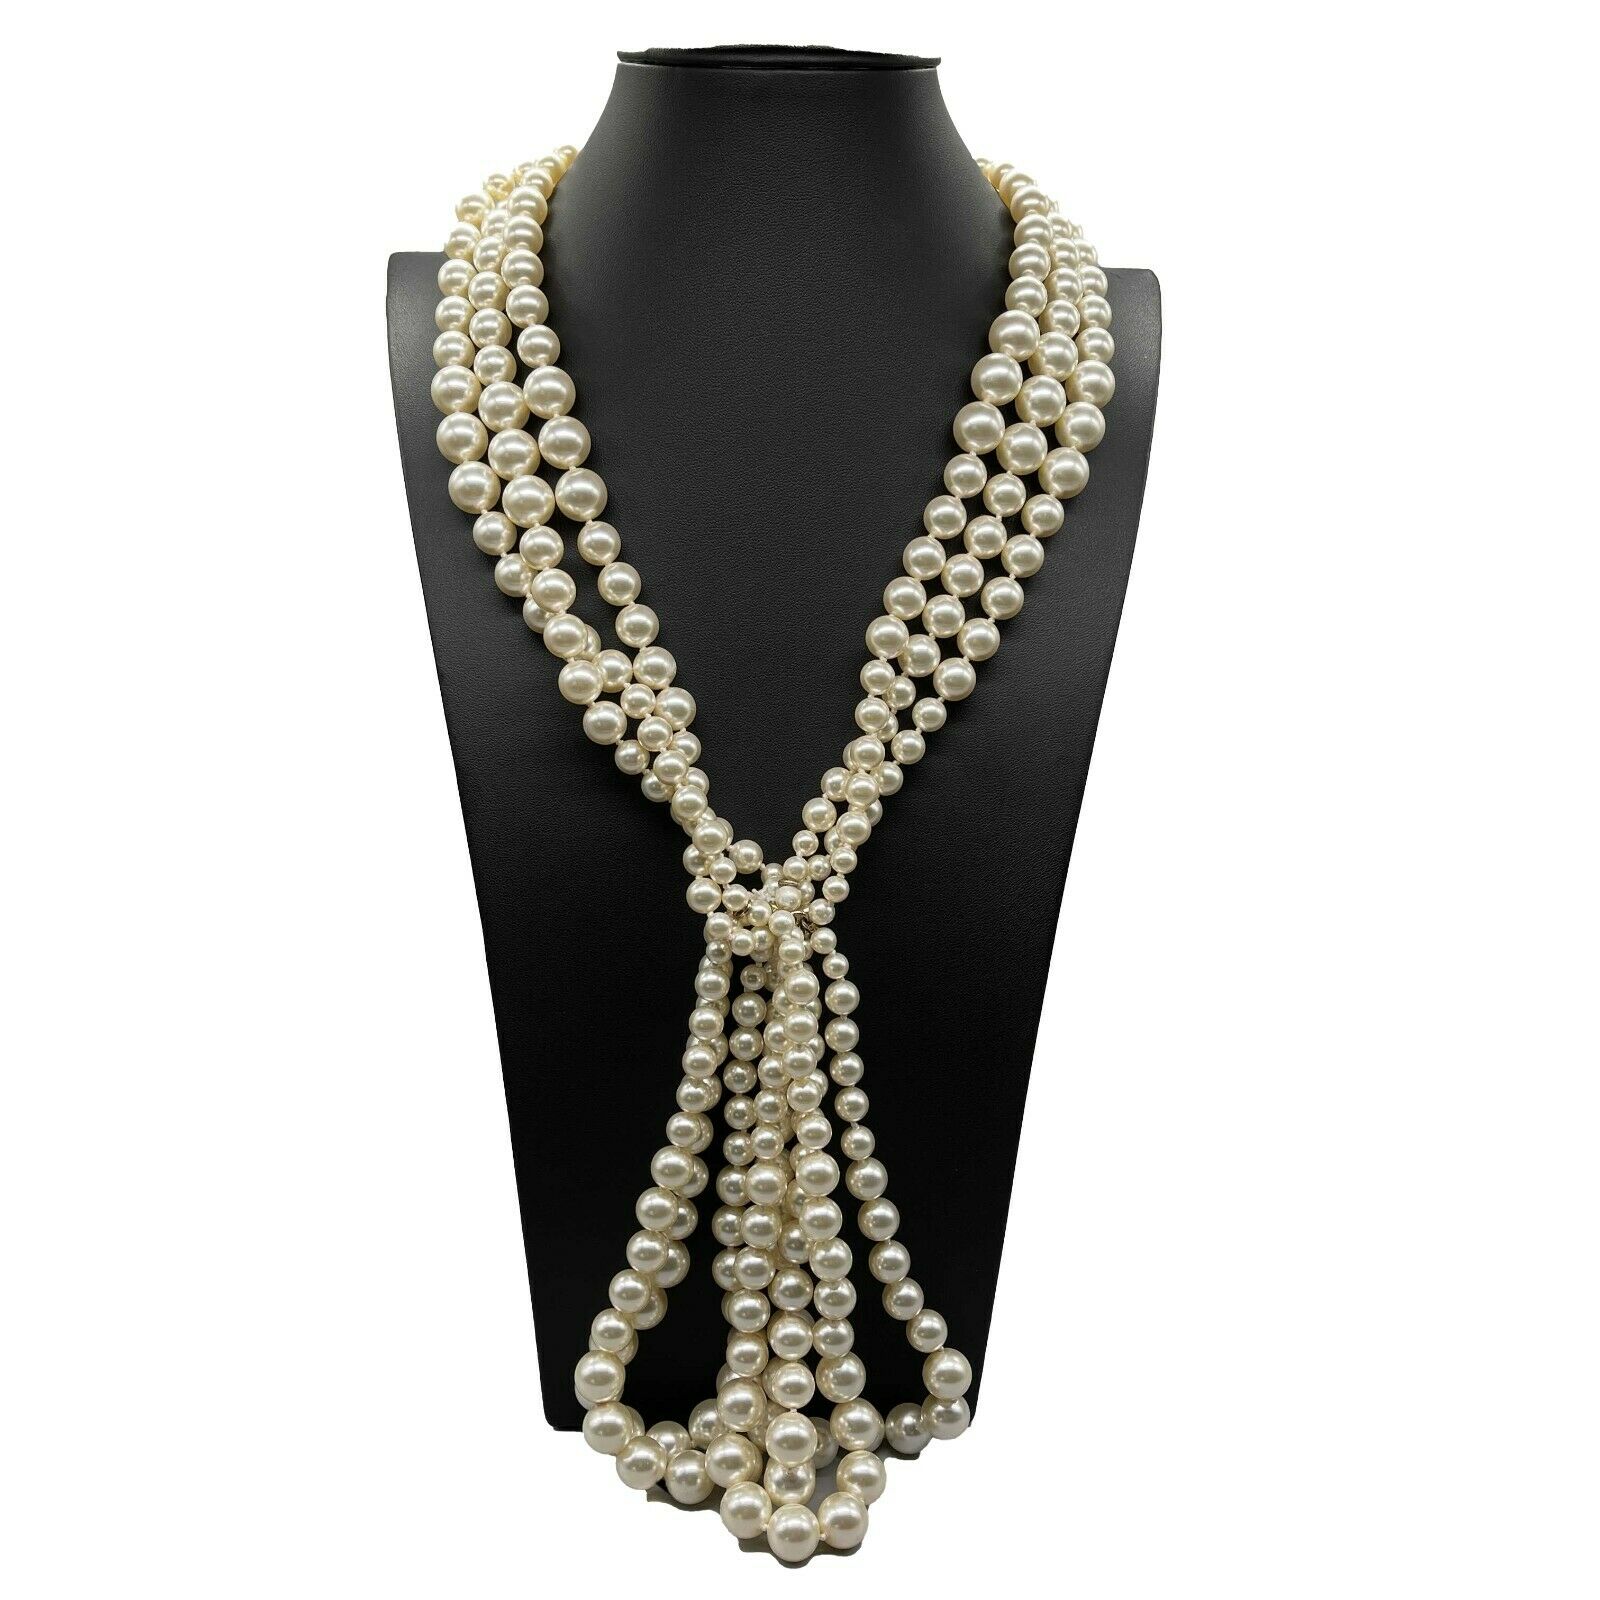 CHANEL - New w/ Tags - B14 White Faux Pearl Multi-Stranded Lavalier CC  Necklace